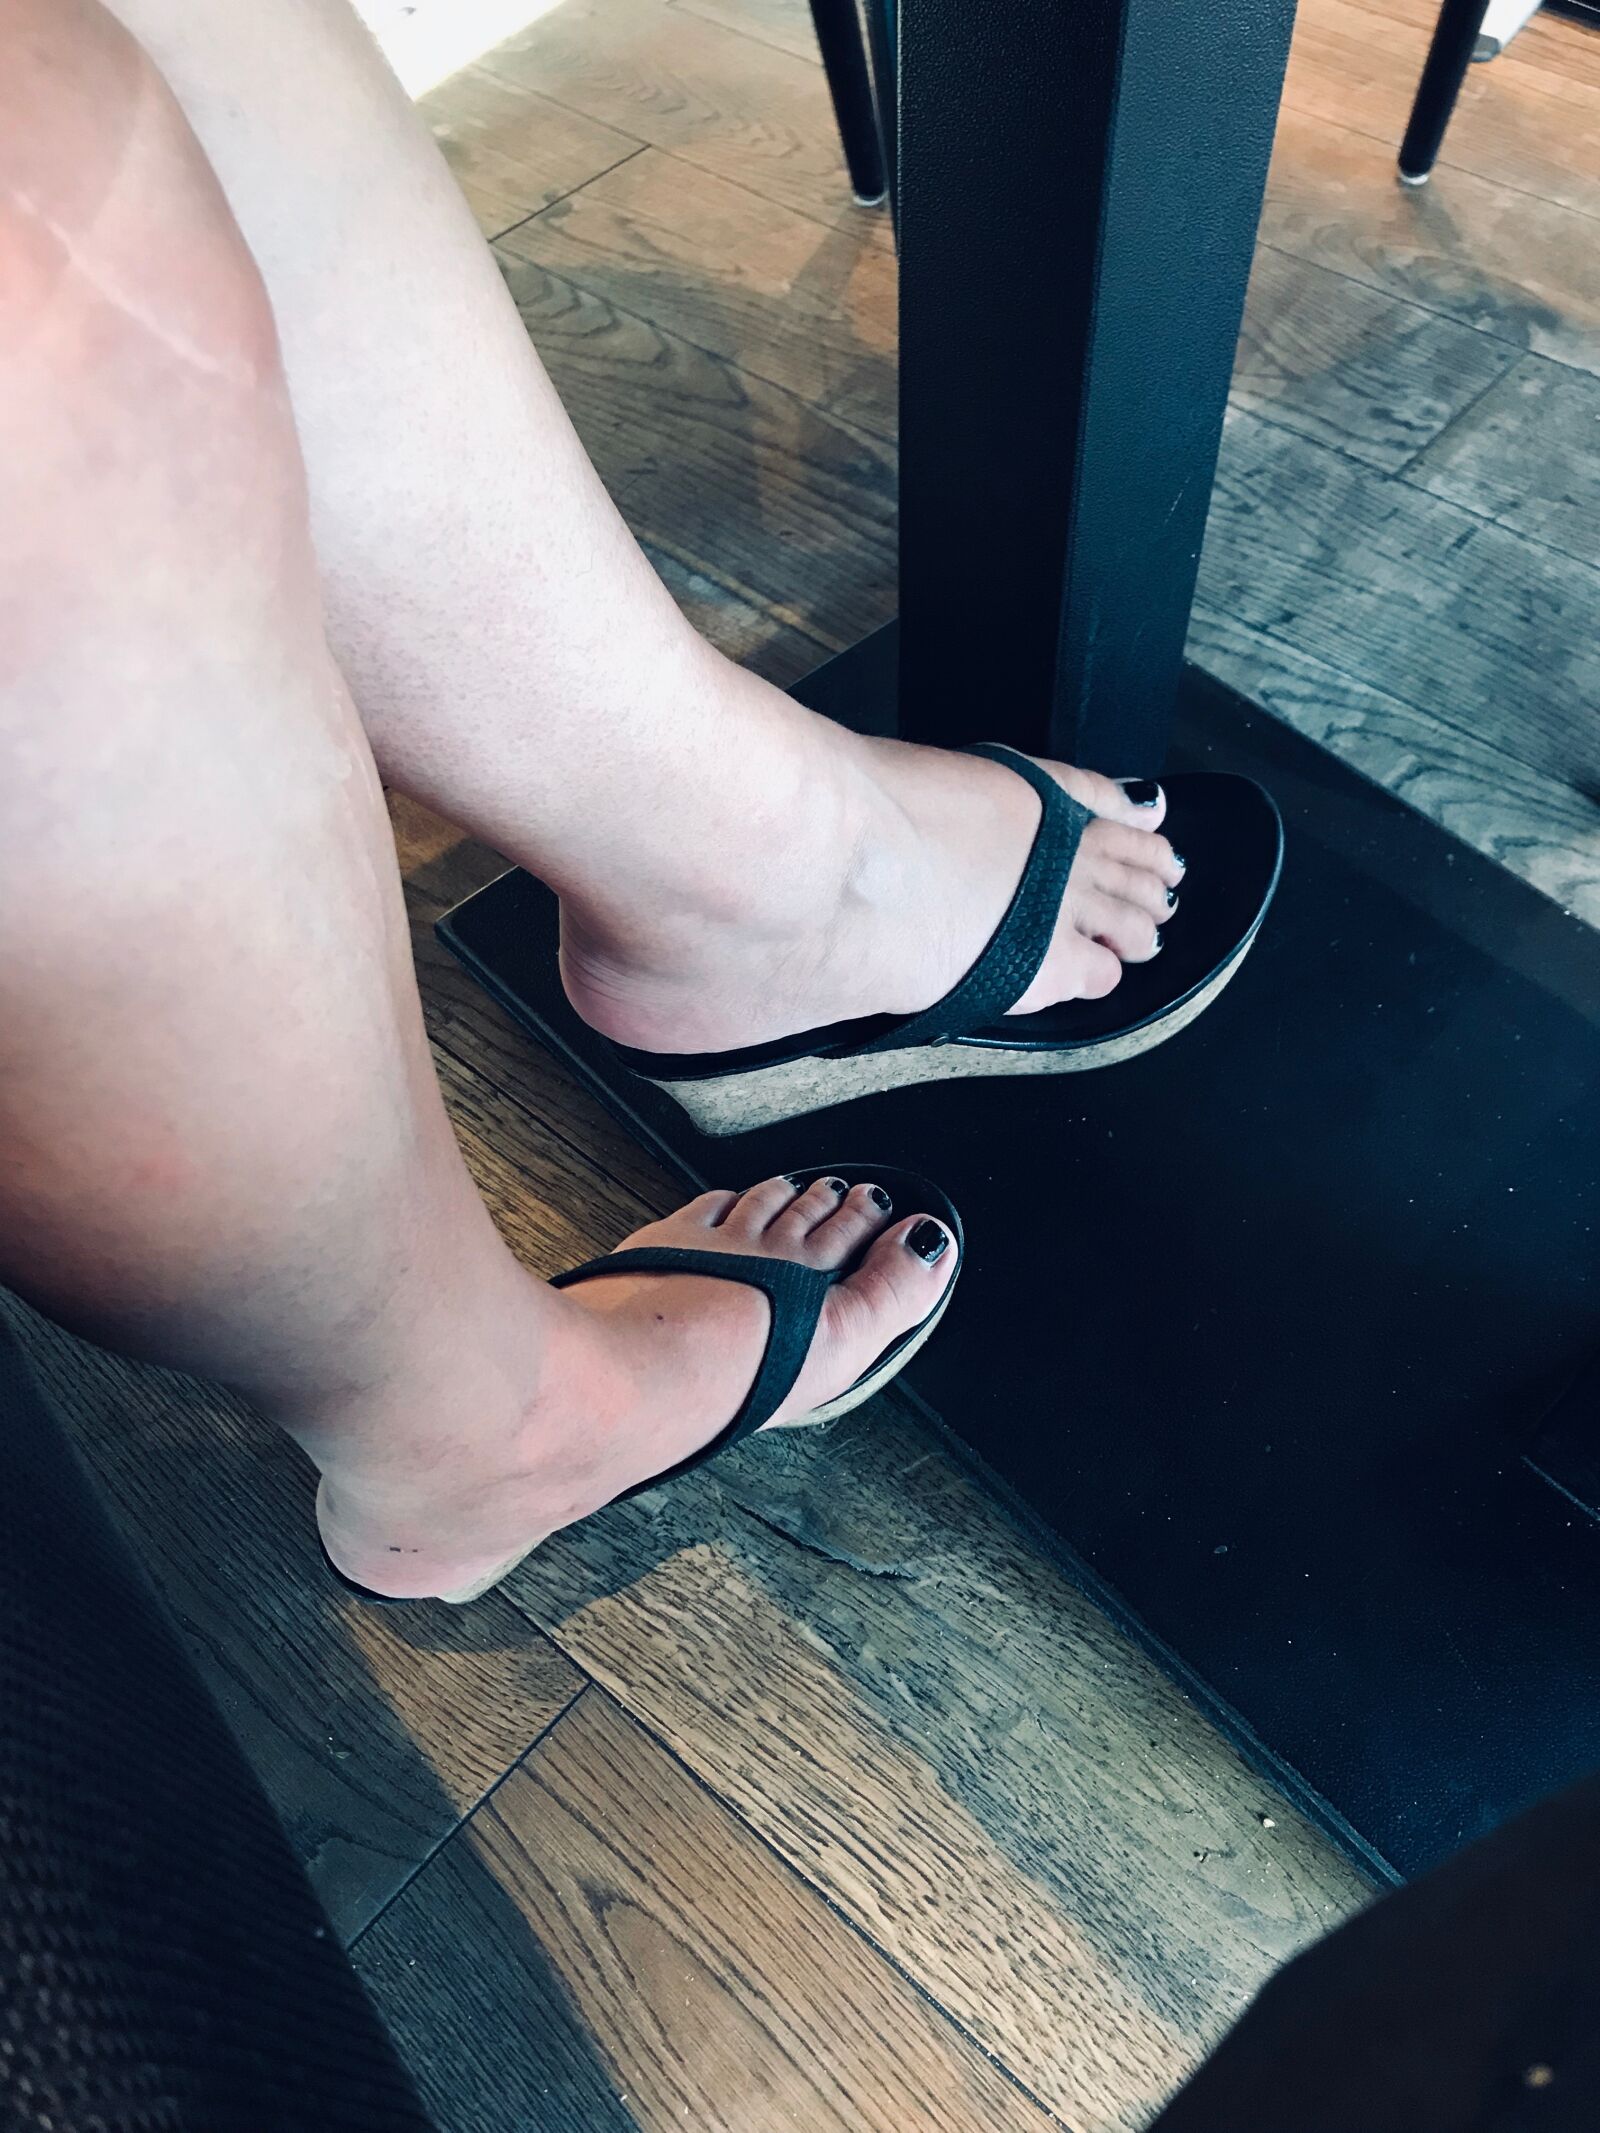 Apple iPhone 7 sample photo. Bdsm, foot slave, foot photography